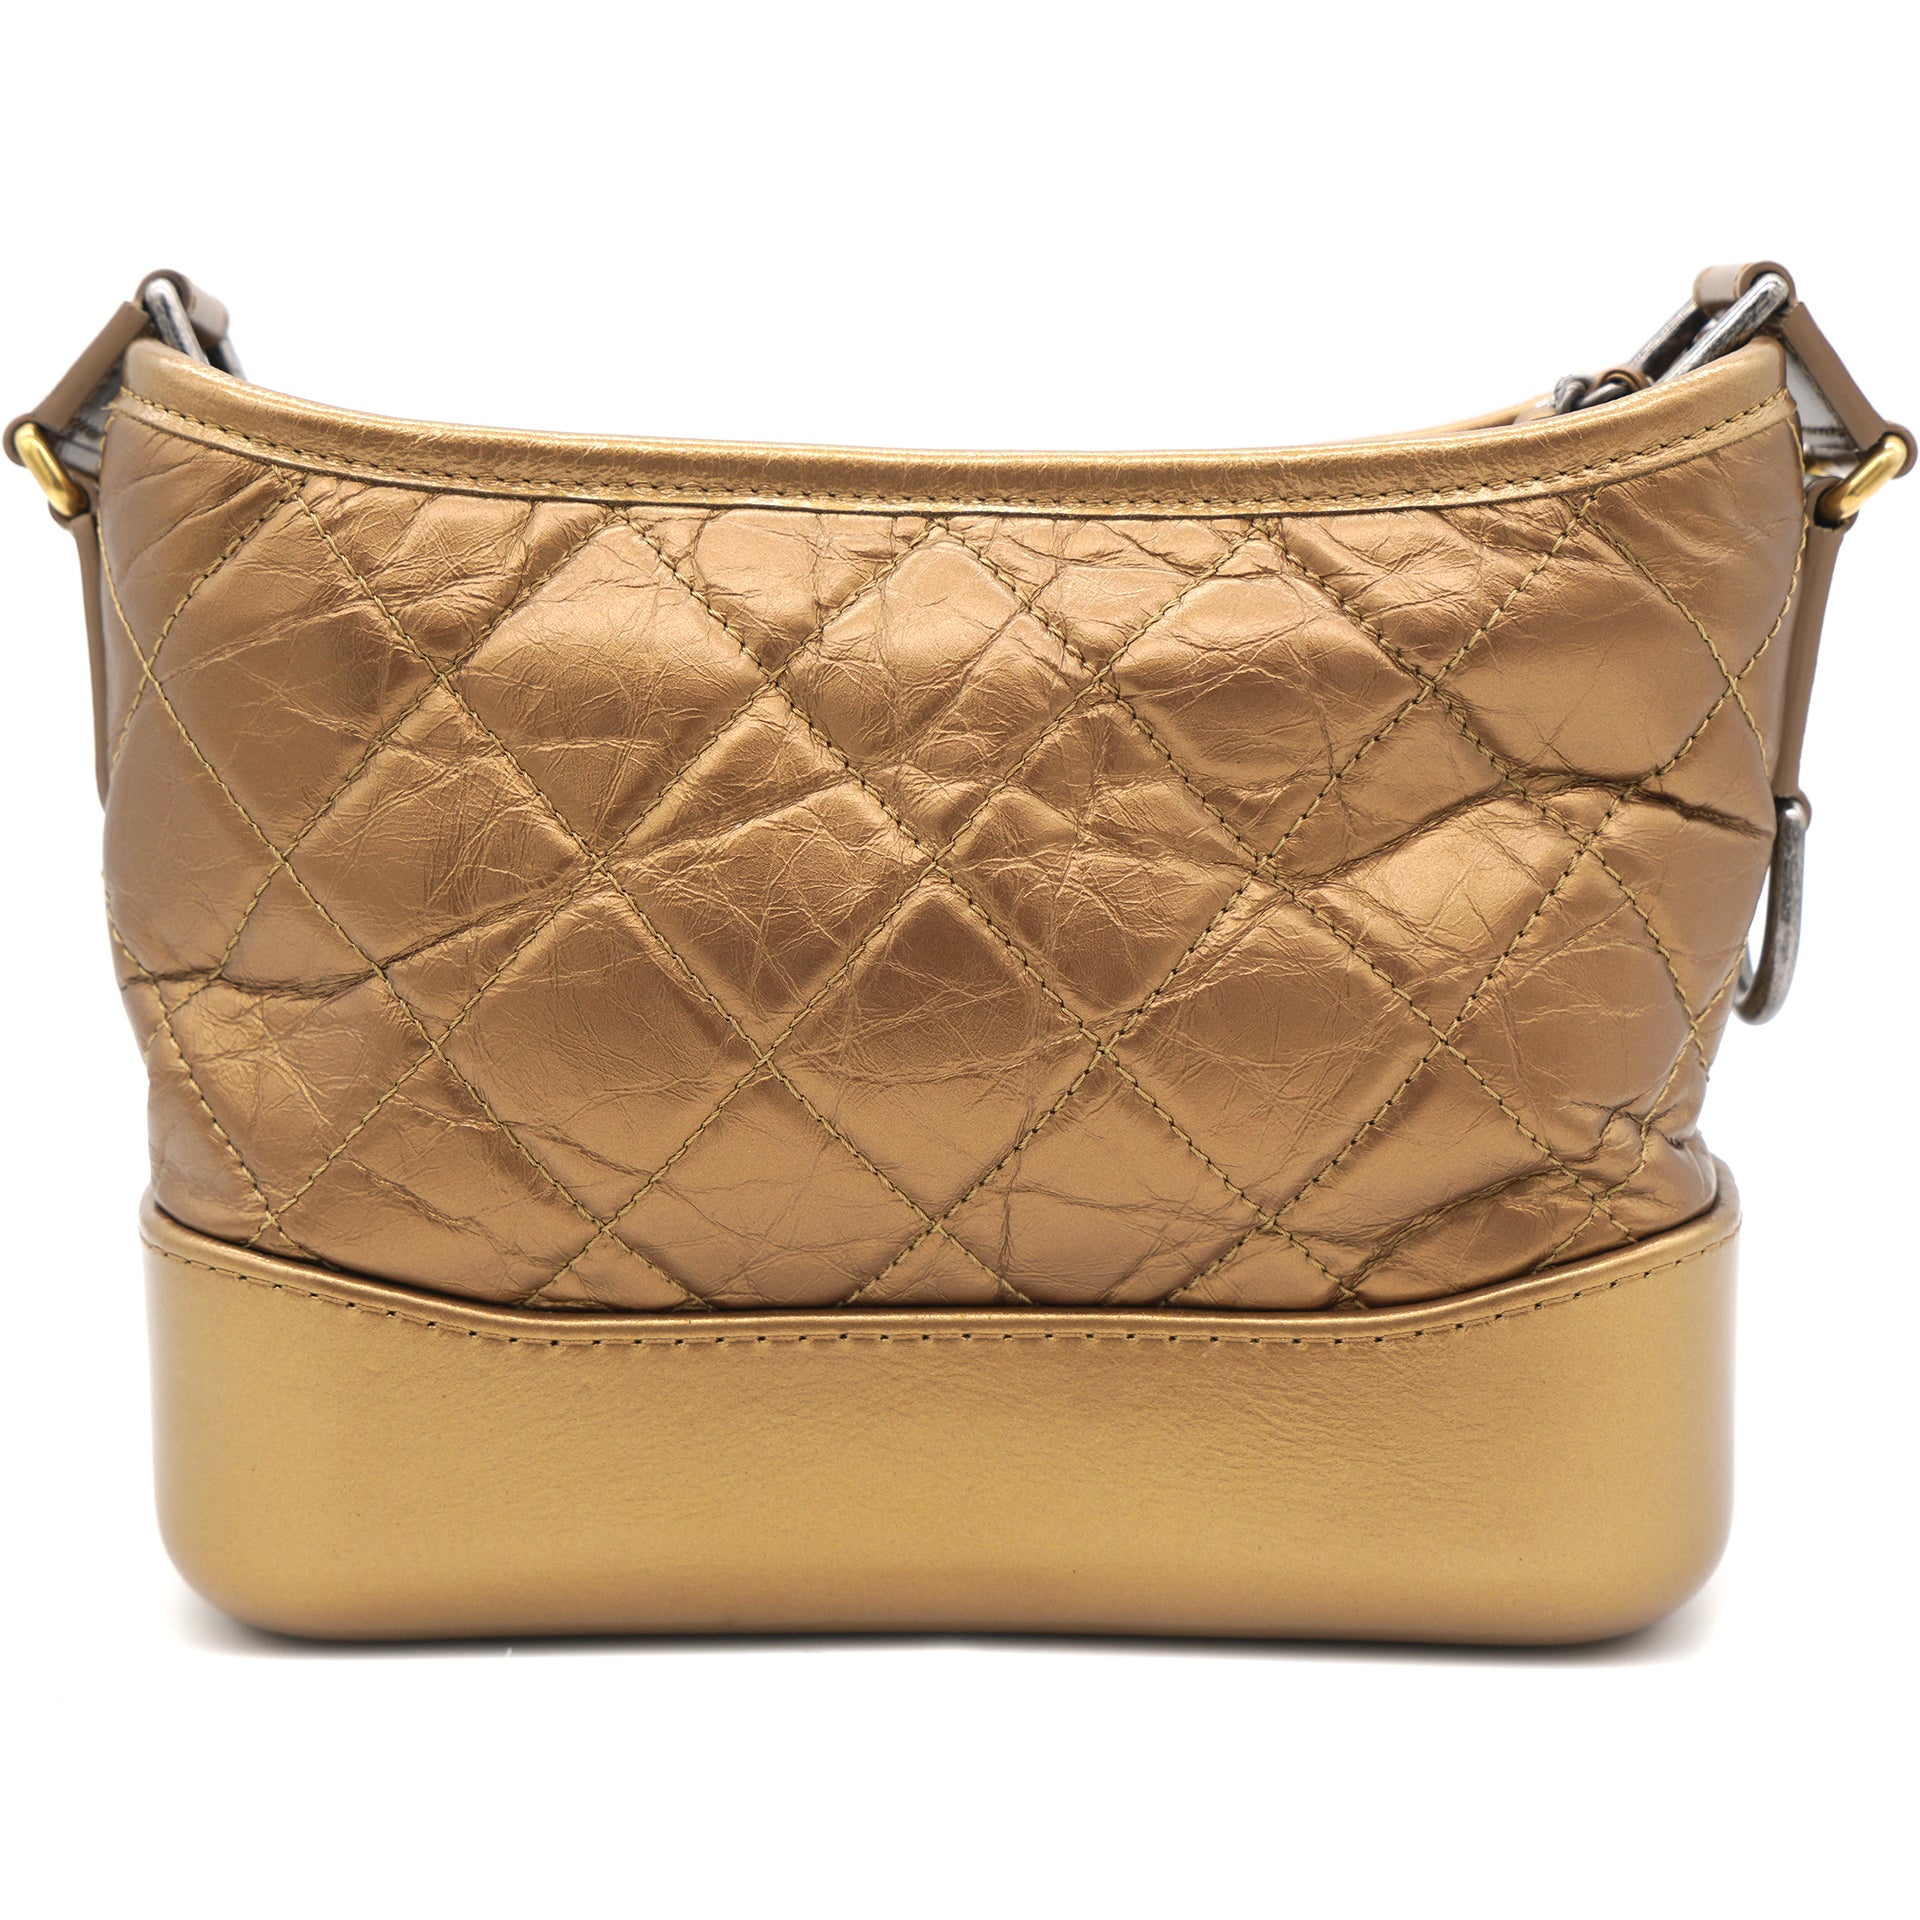 CHANEL Aged Calfskin Quilted Leather Medium Gabrielle Messenger Bag Gold